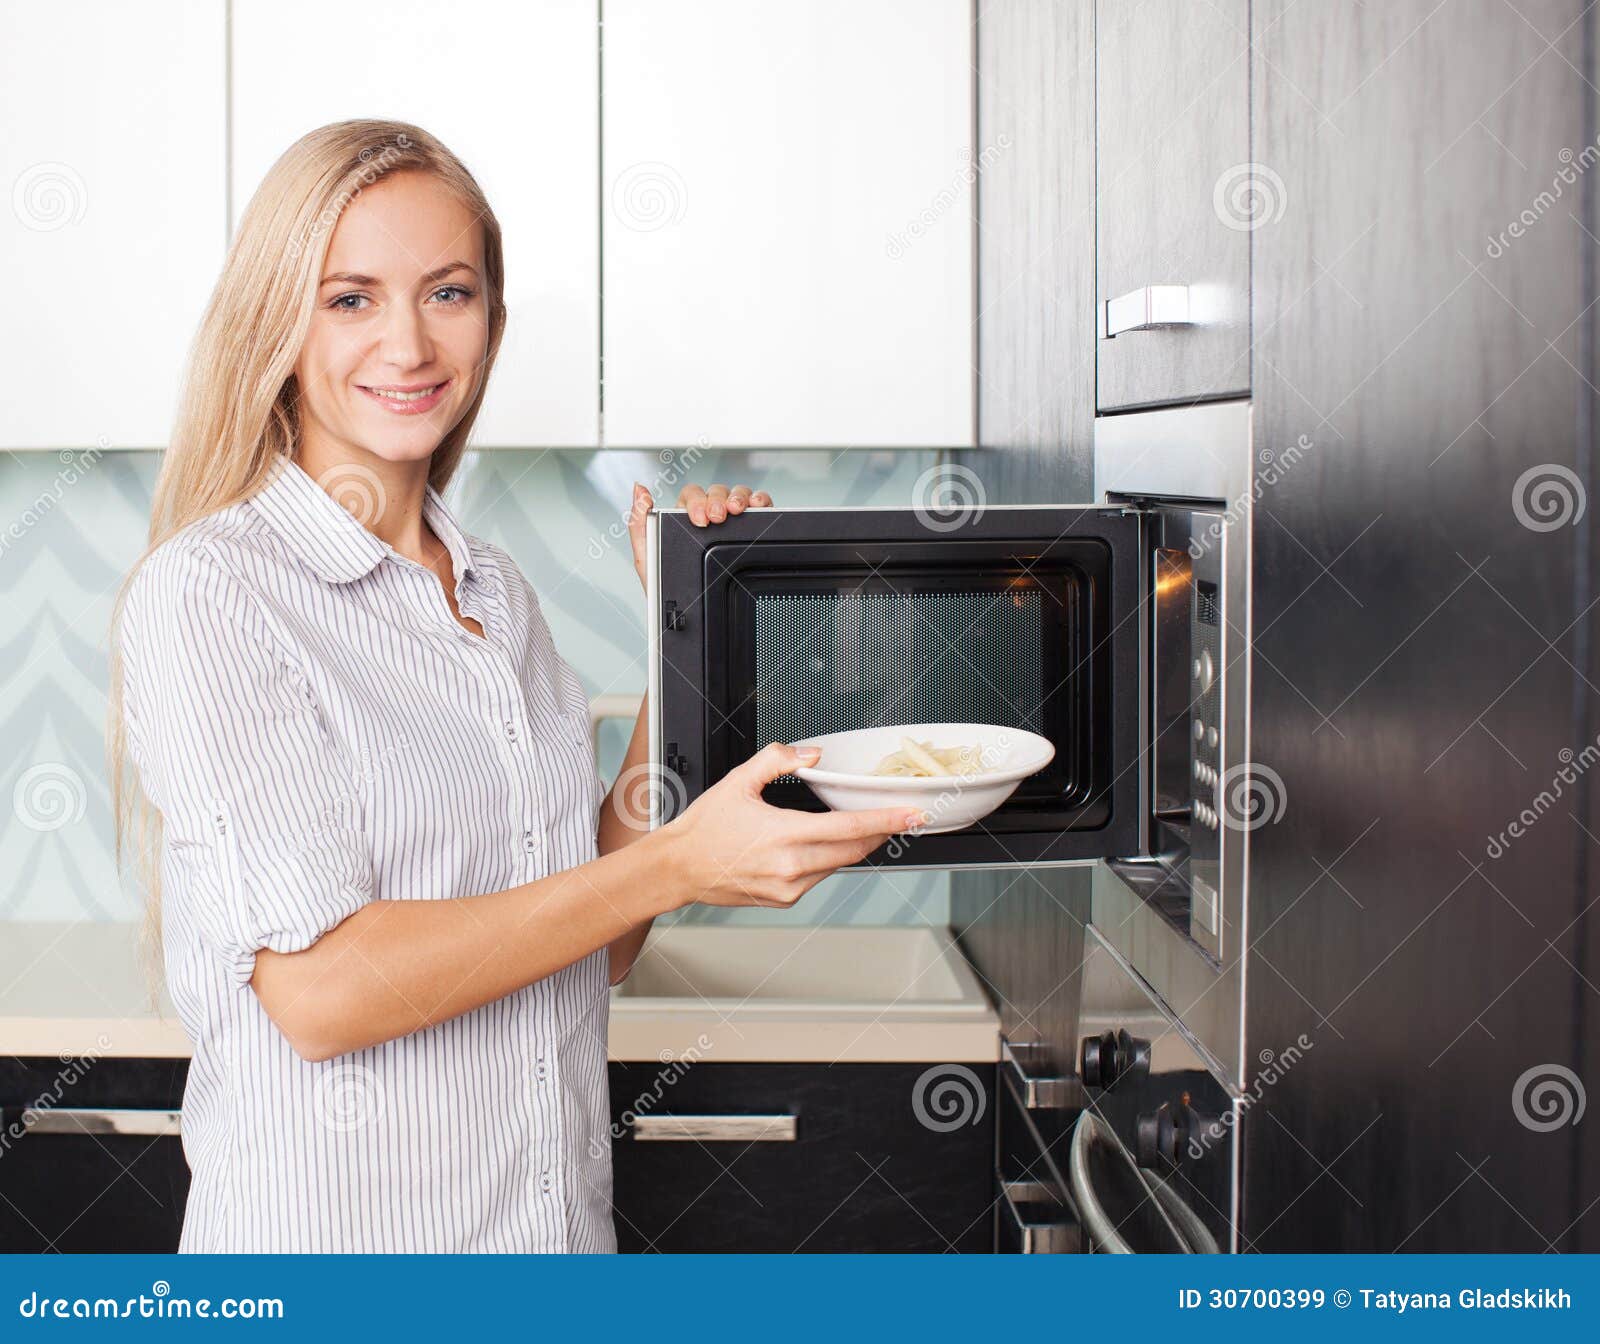 https://thumbs.dreamstime.com/z/woman-warms-up-food-microwave-young-30700399.jpg